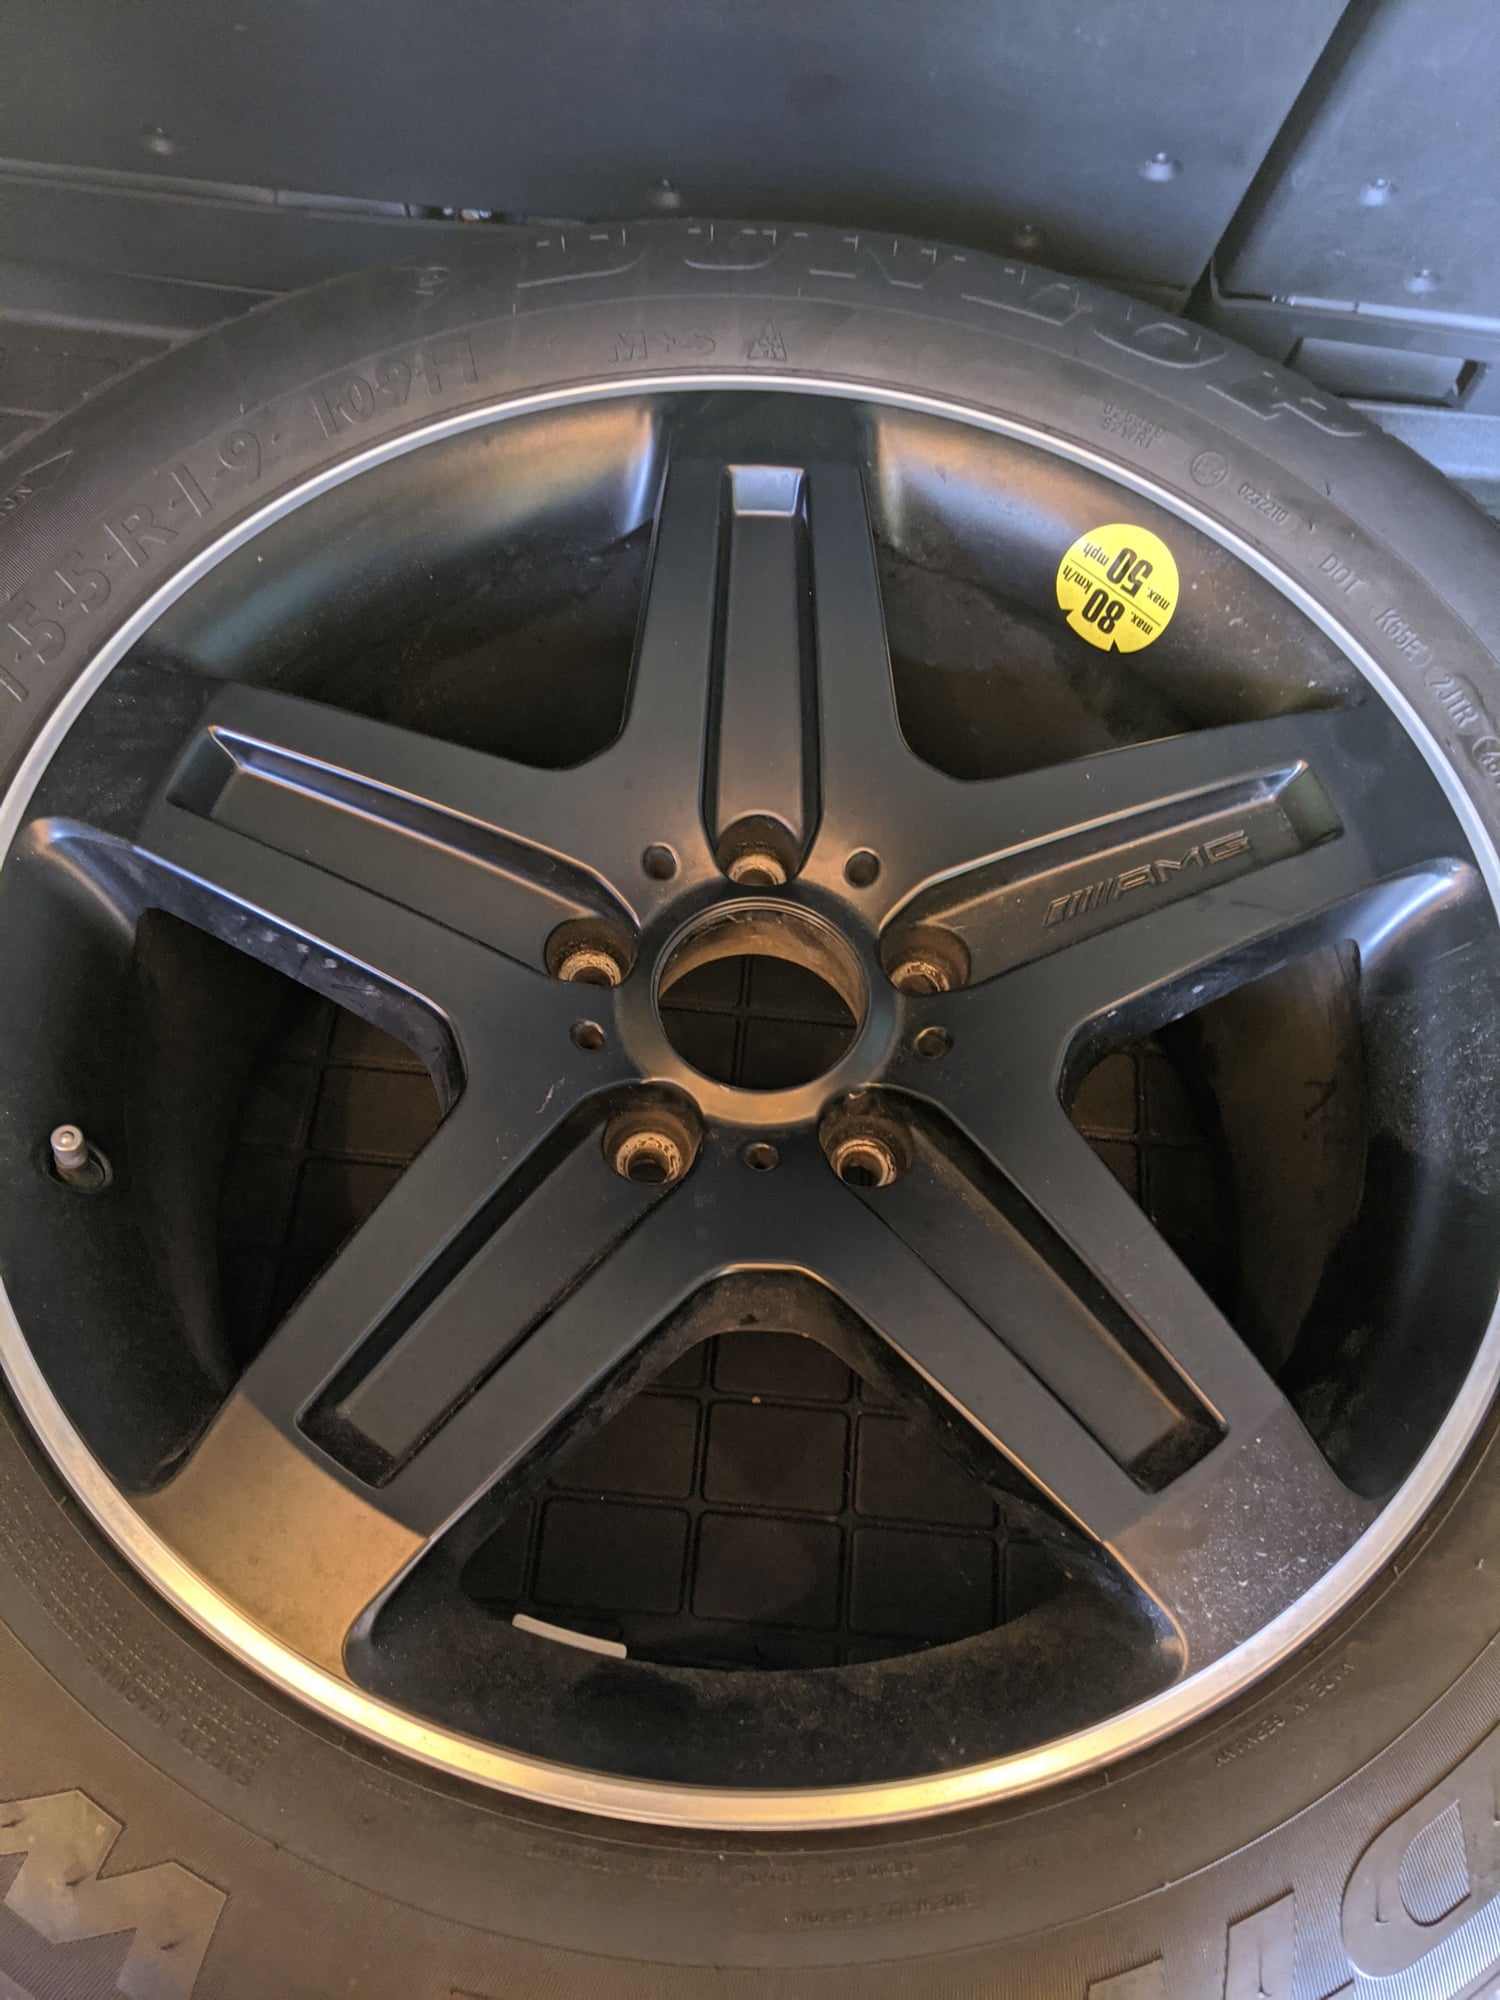 Wheels and Tires/Axles - G550 OEM spare wheel and tire. Black 19" $500 - Used - 2002 to 2018 Mercedes-Benz G550 - San Mateo, CA 94401, United States